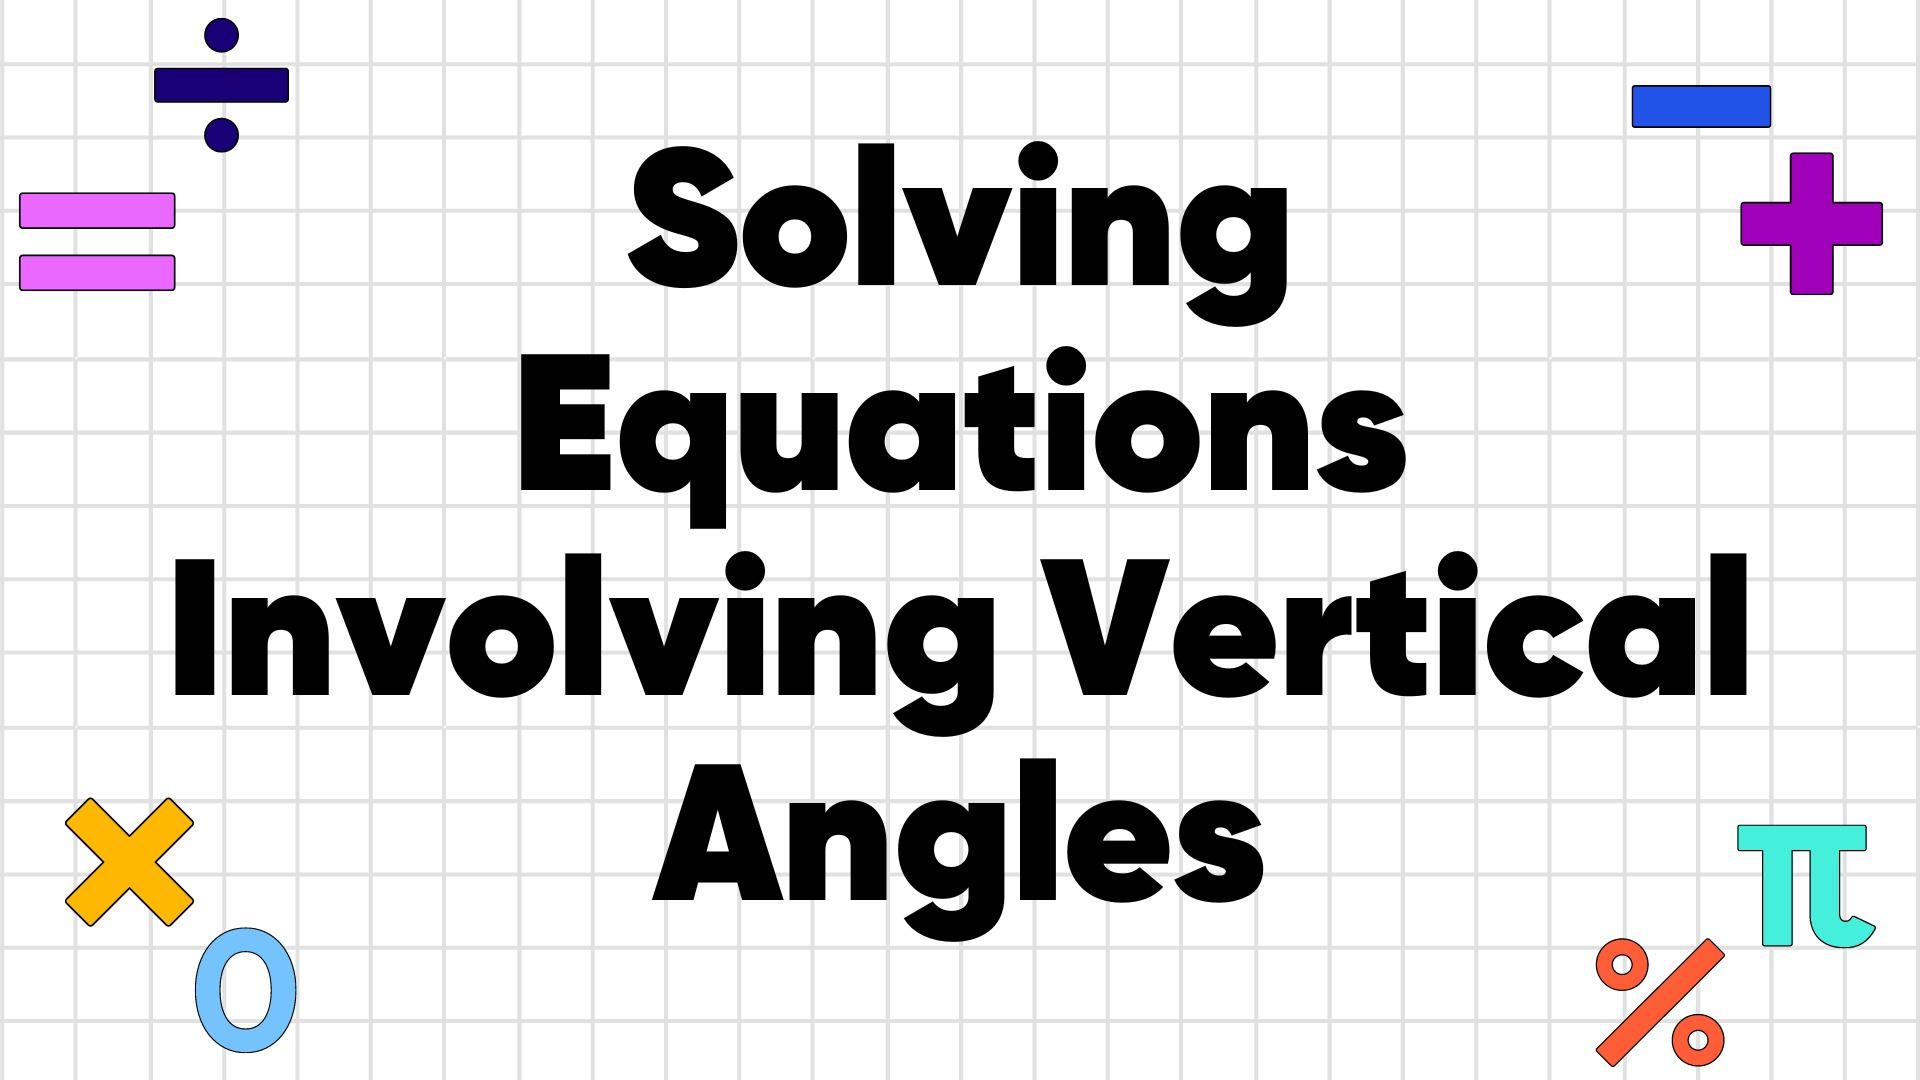 How To Solve Equations Involving Vertical Angles by Students